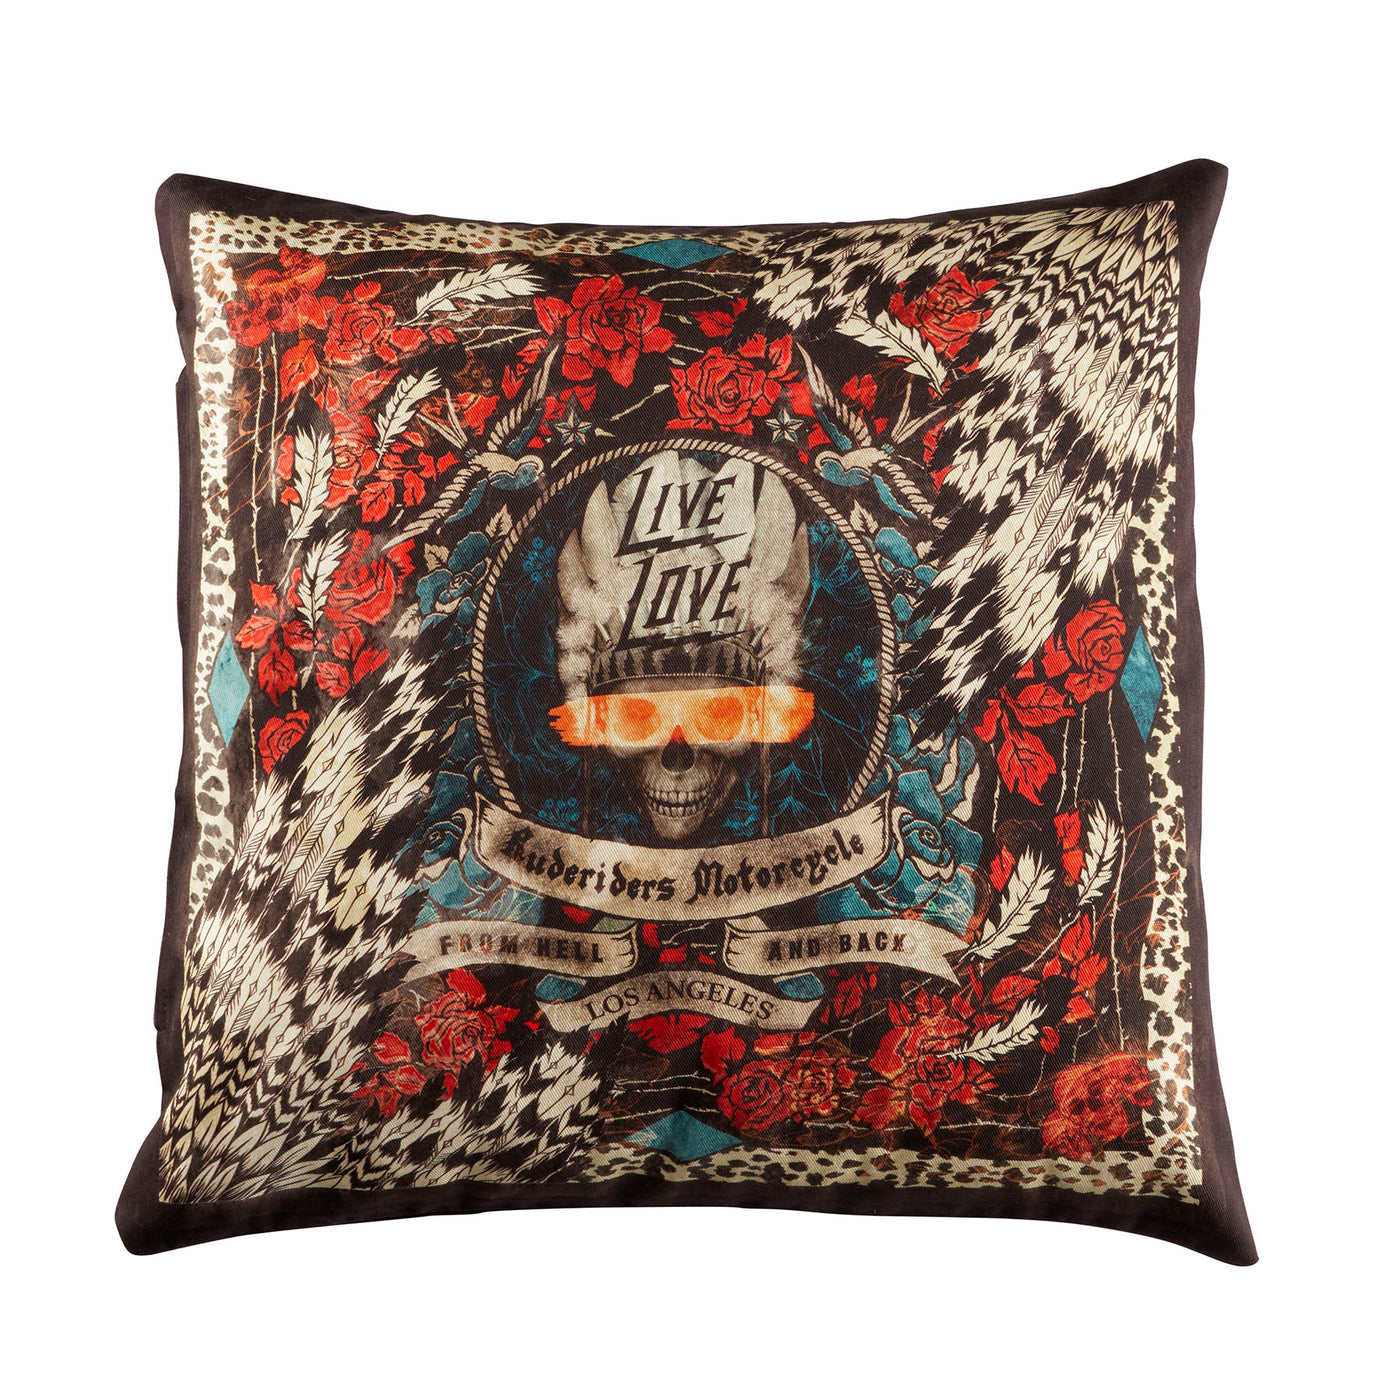 Rude Riders cushion cover Rude Roots